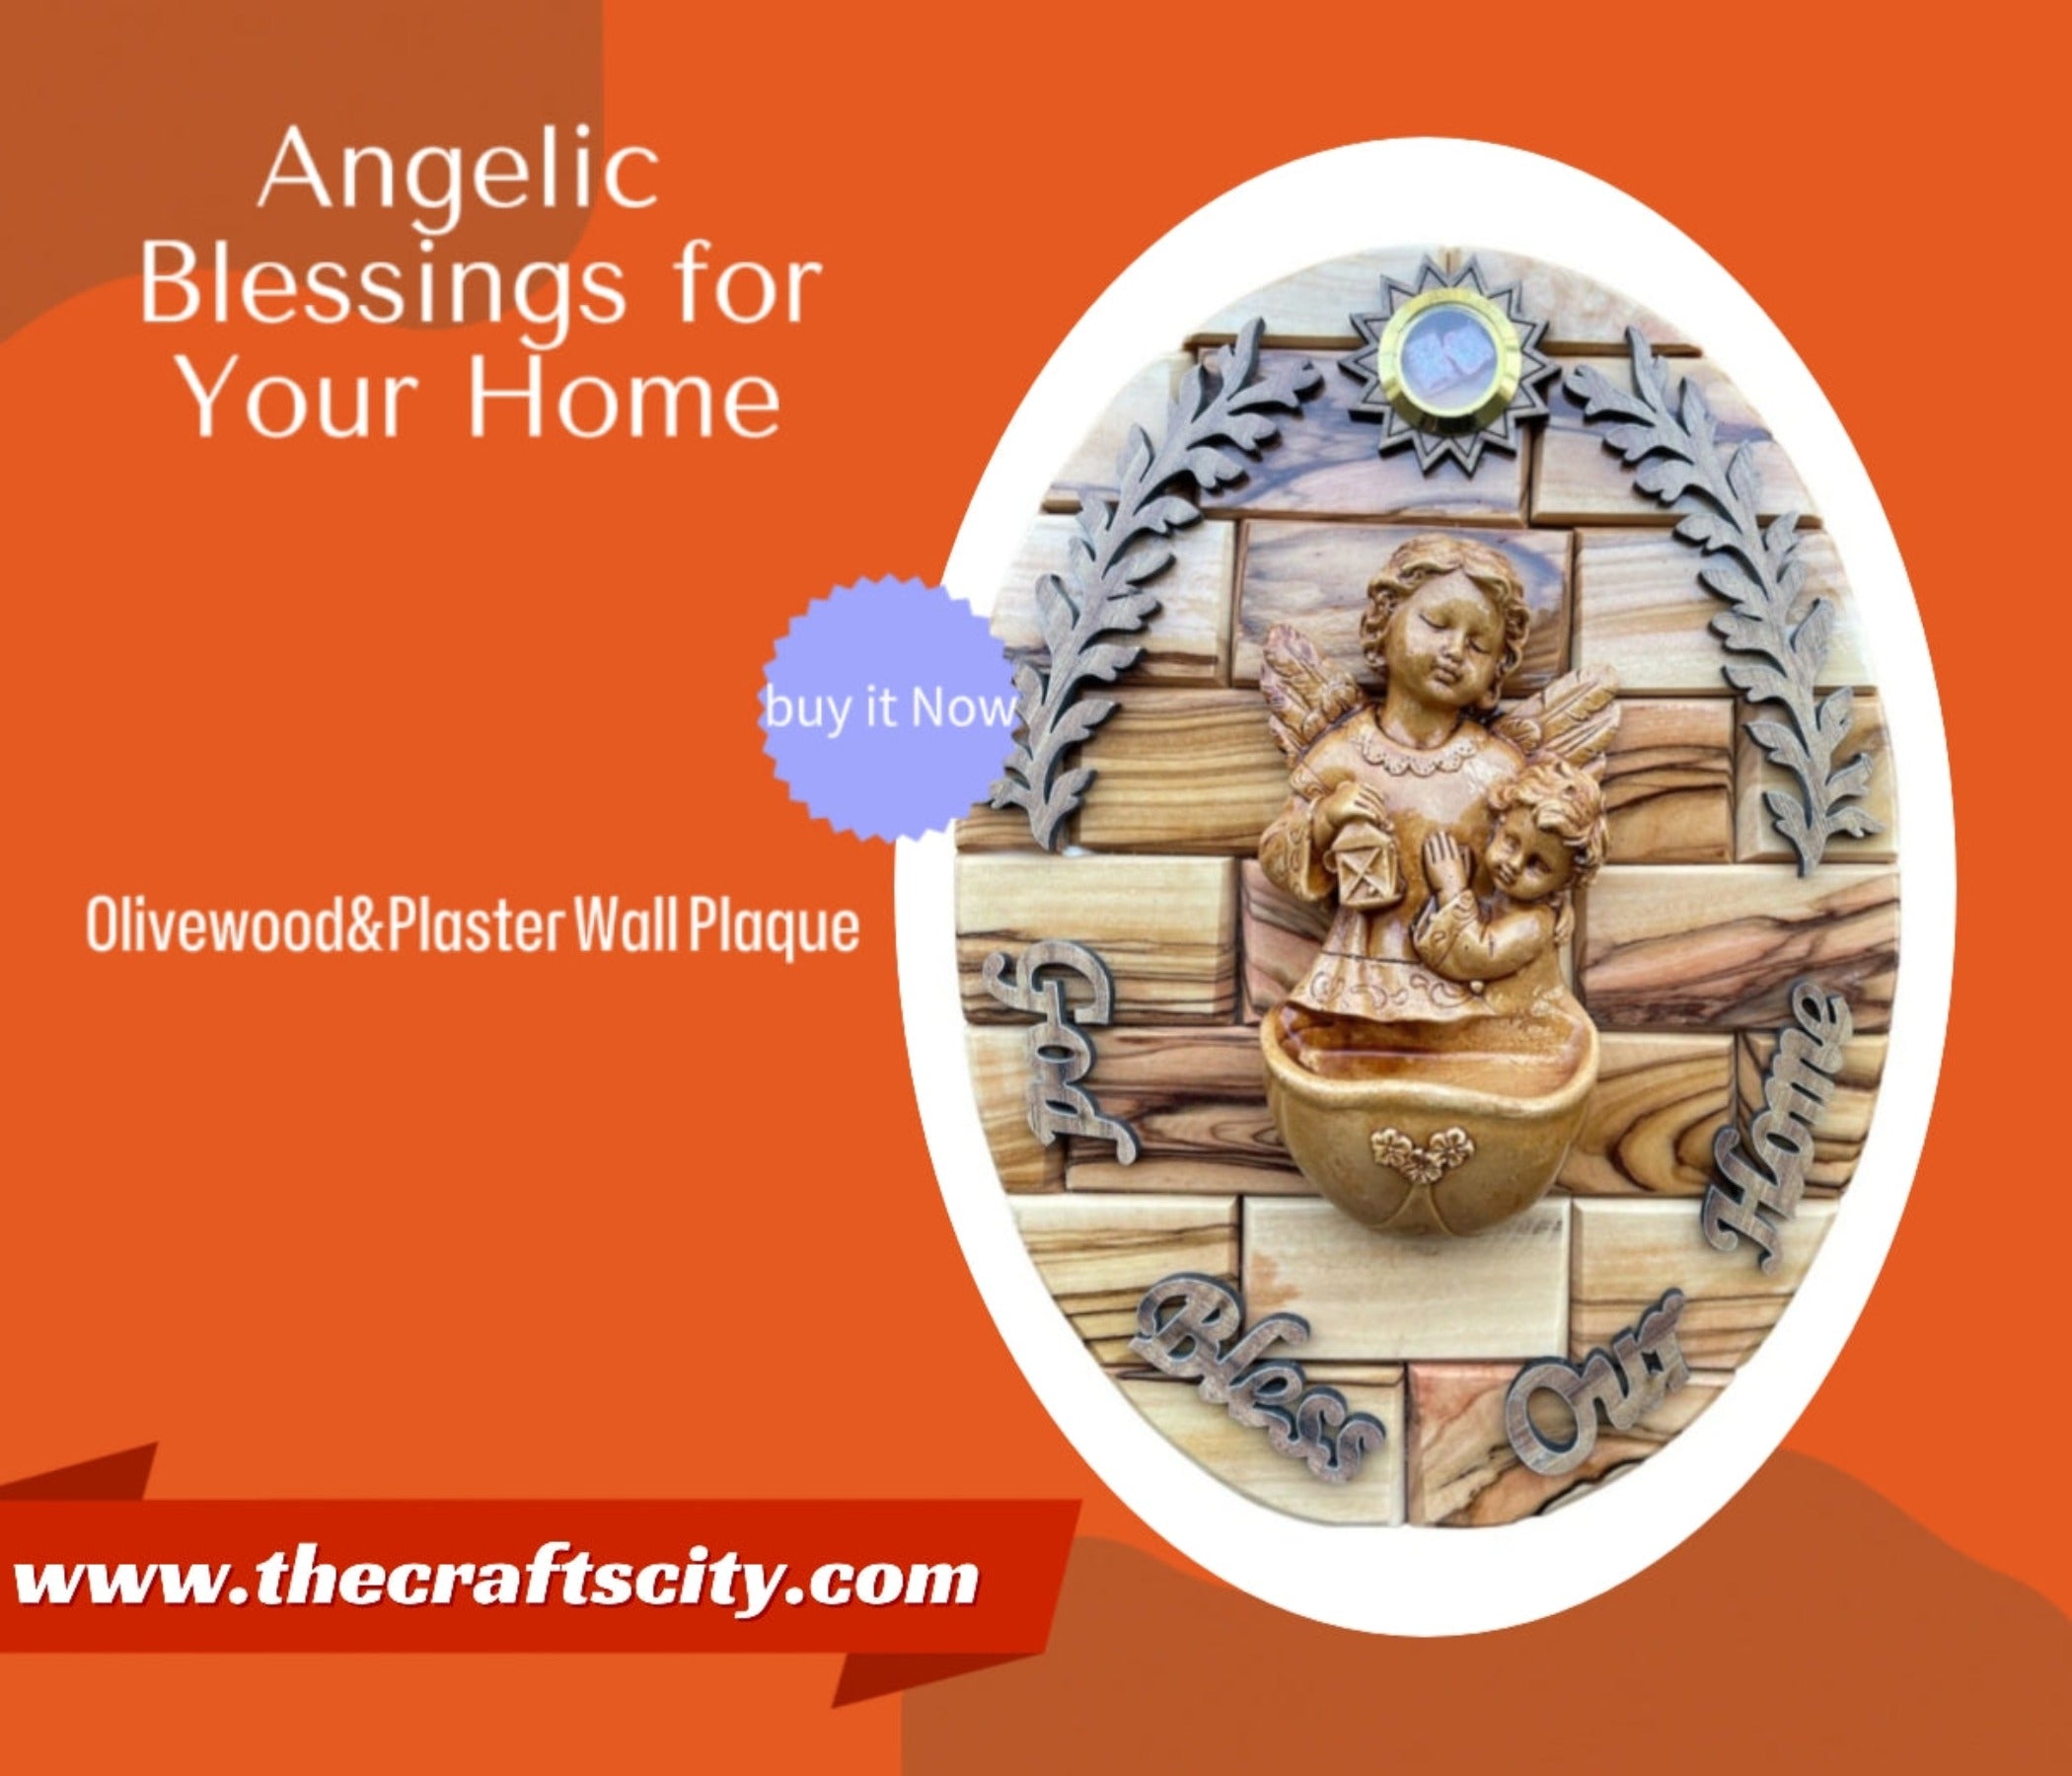 Divine Wings: Angelic Blessings for Your Home”Olivewood & Plaster